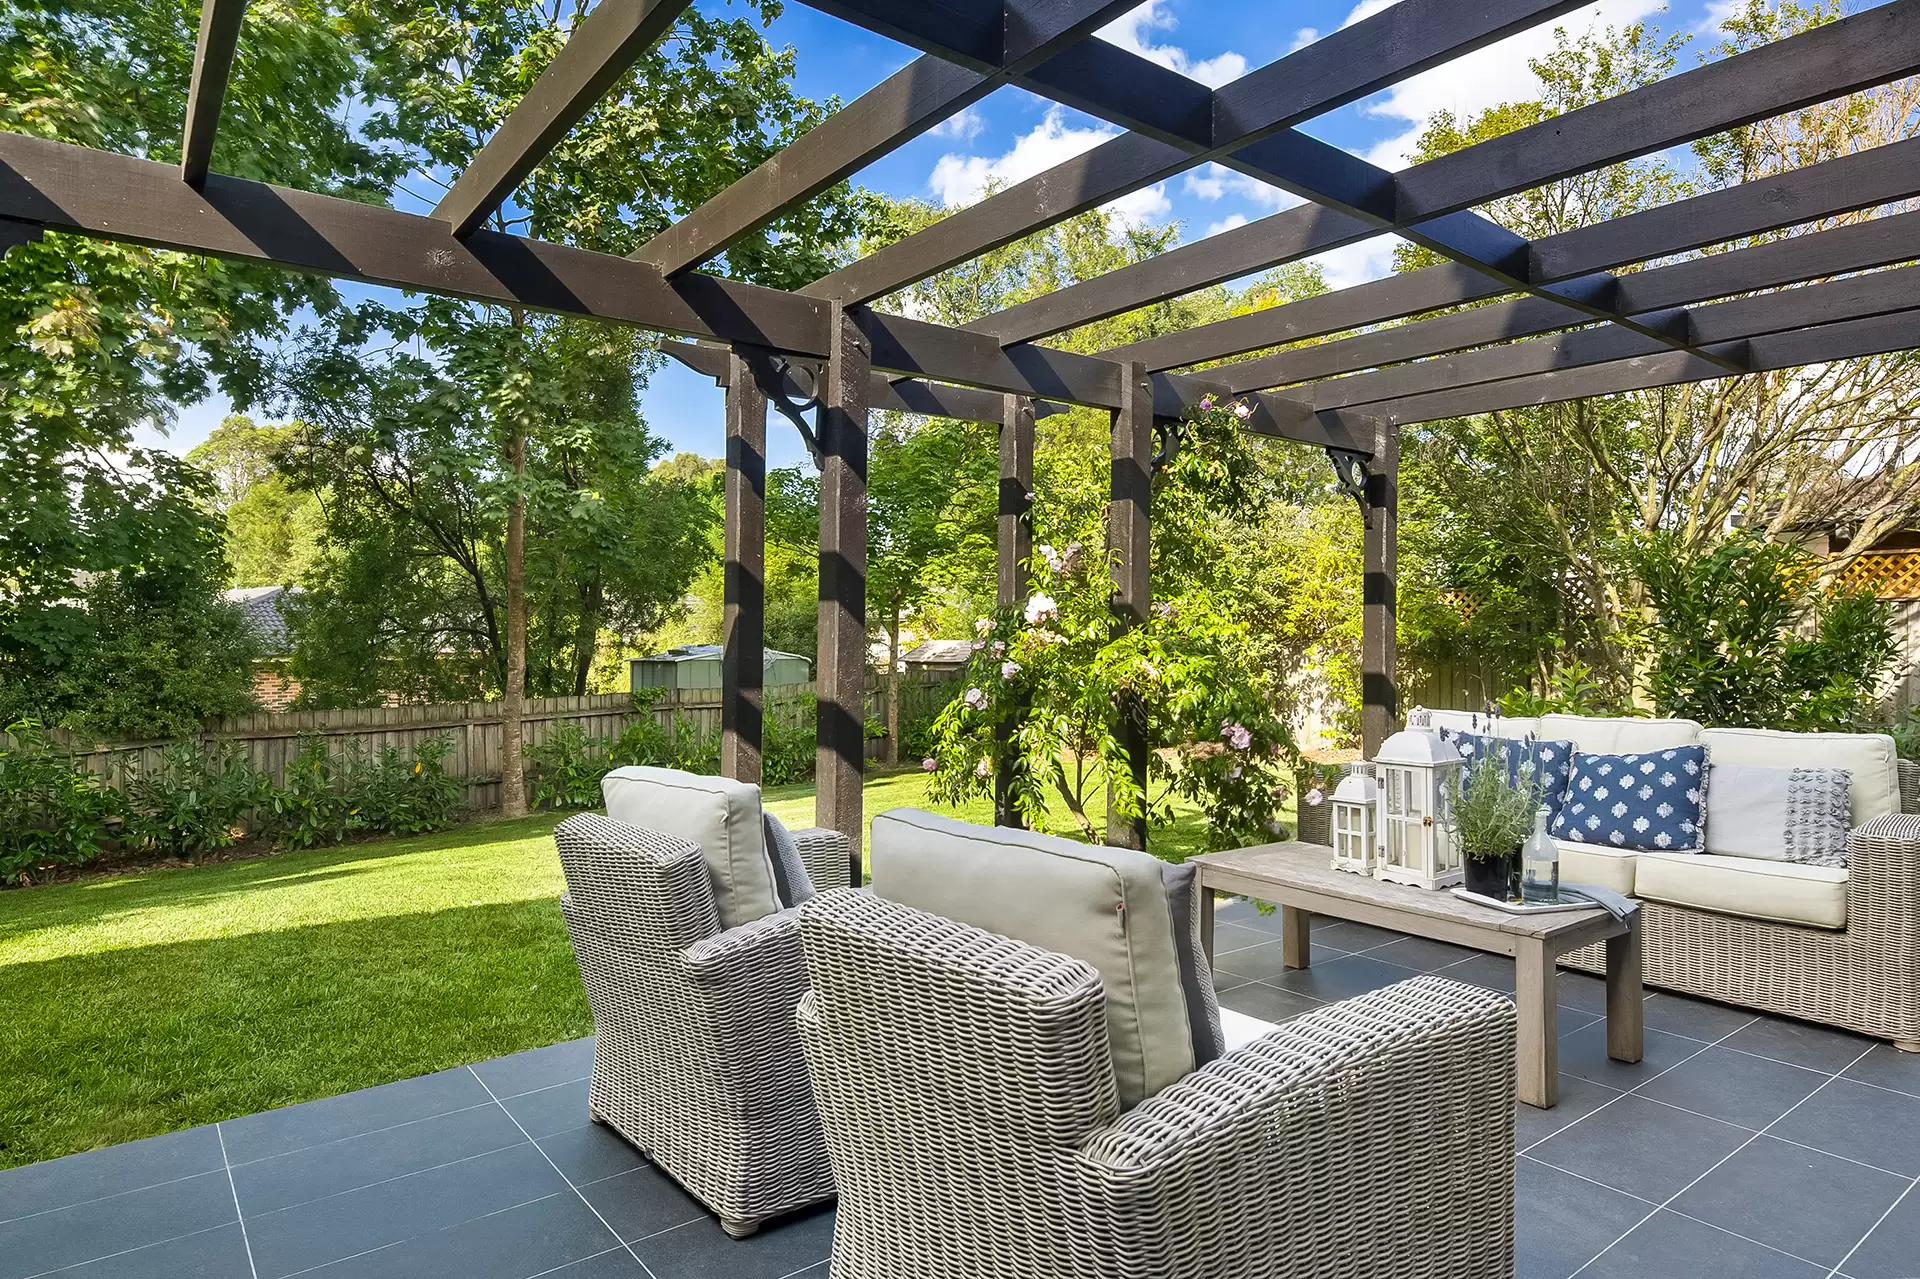 Photo #4: 11 Plane Tree Close, Bowral - Sold by Drew Lindsay Sotheby's International Realty